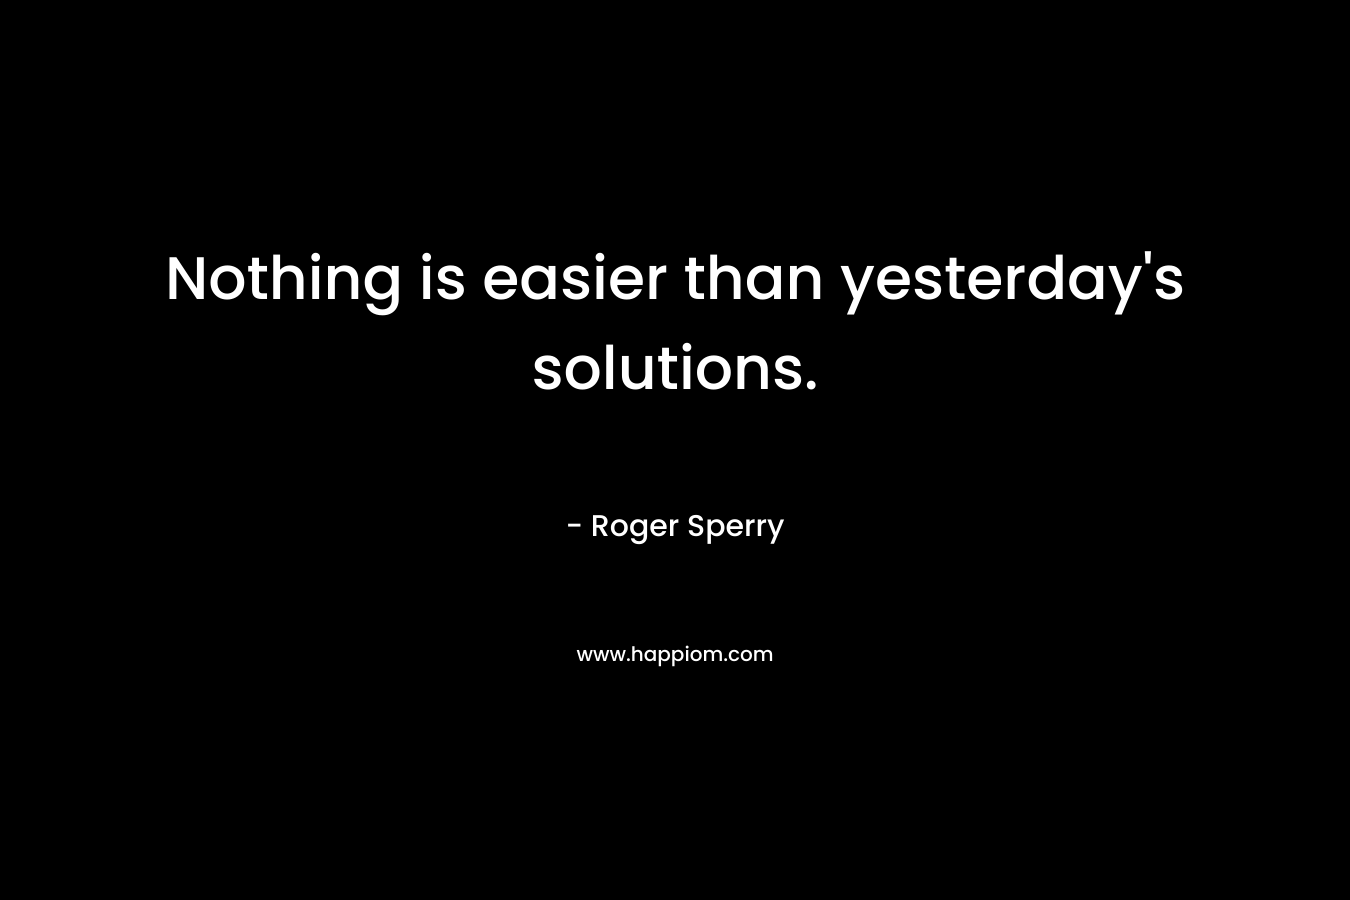 Nothing is easier than yesterday’s solutions. – Roger Sperry